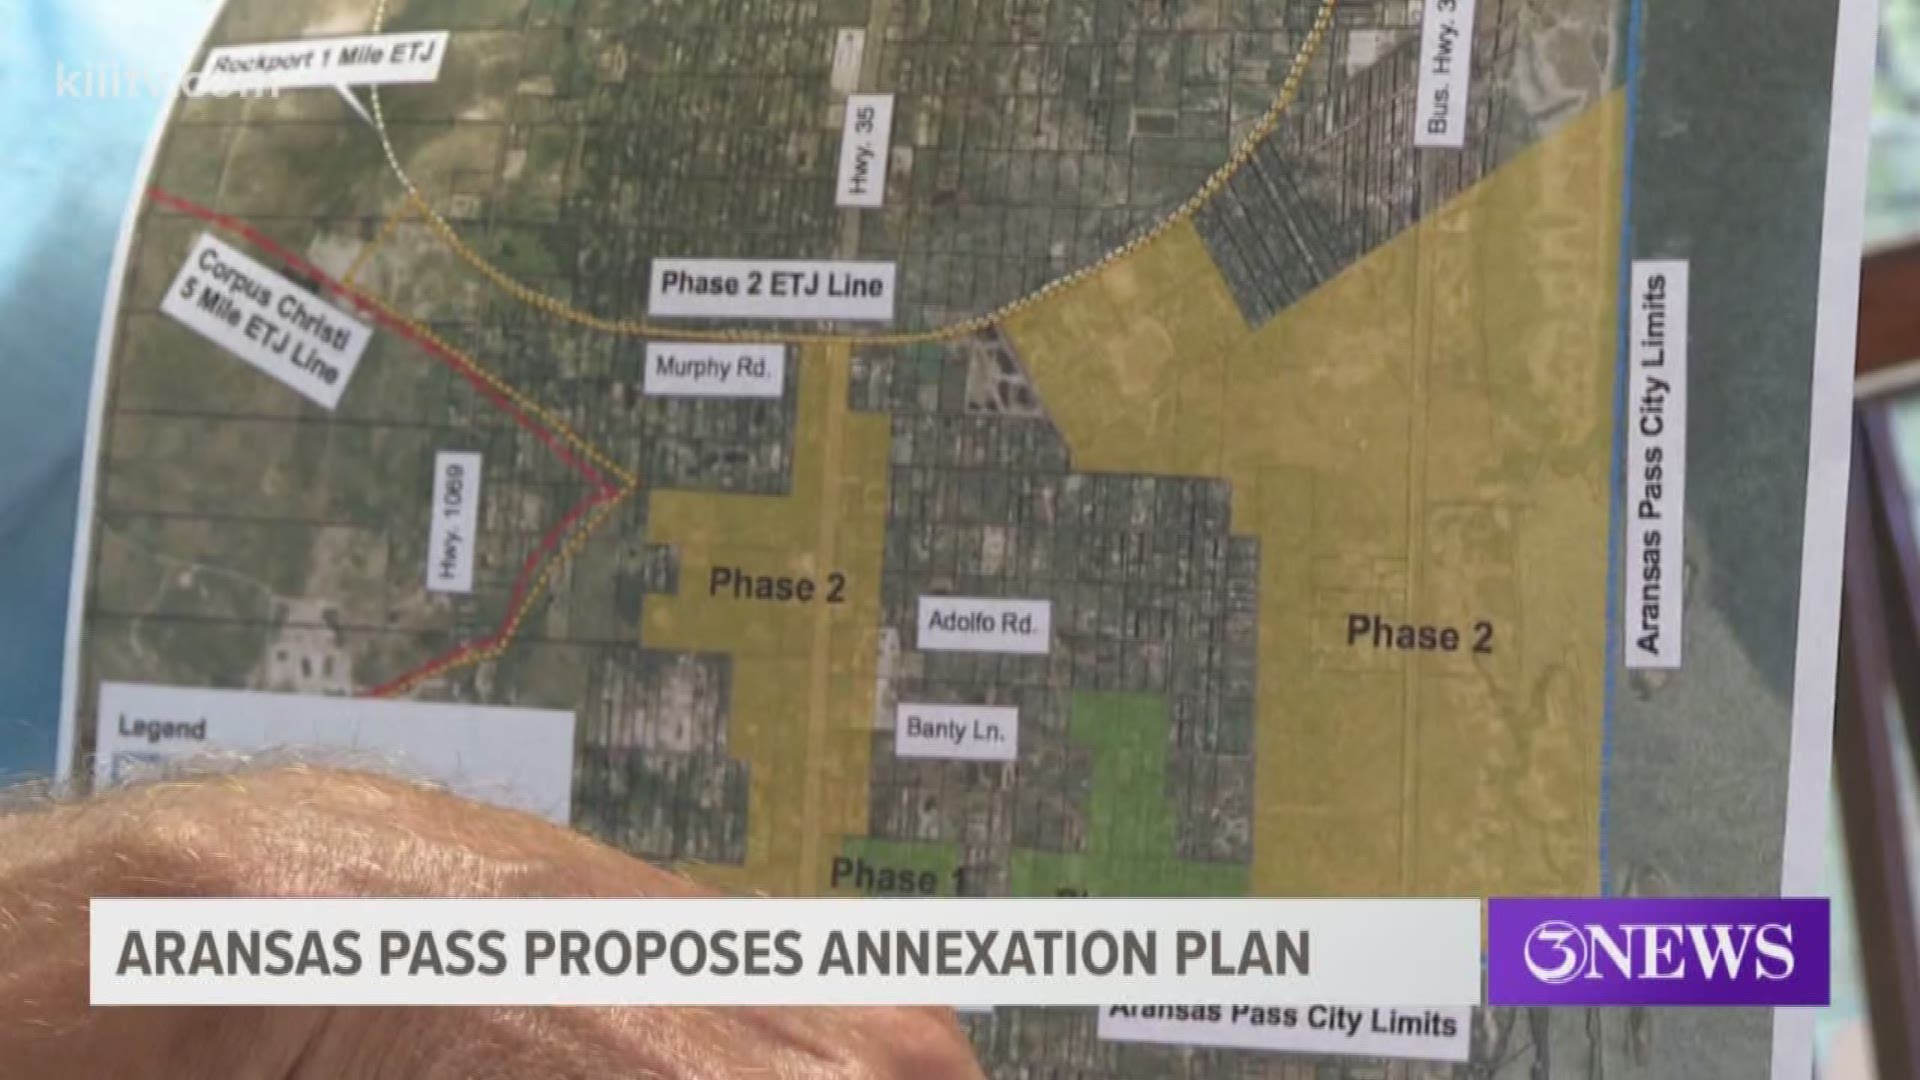 A public meeting was held Monday evening in Aransas Pass, Texas, to discuss what has become a big controversy there. At issue is whether the City should annex about 1,400 acres of land, which supporters say would keep the land in question away from other cities like Corpus Christi.